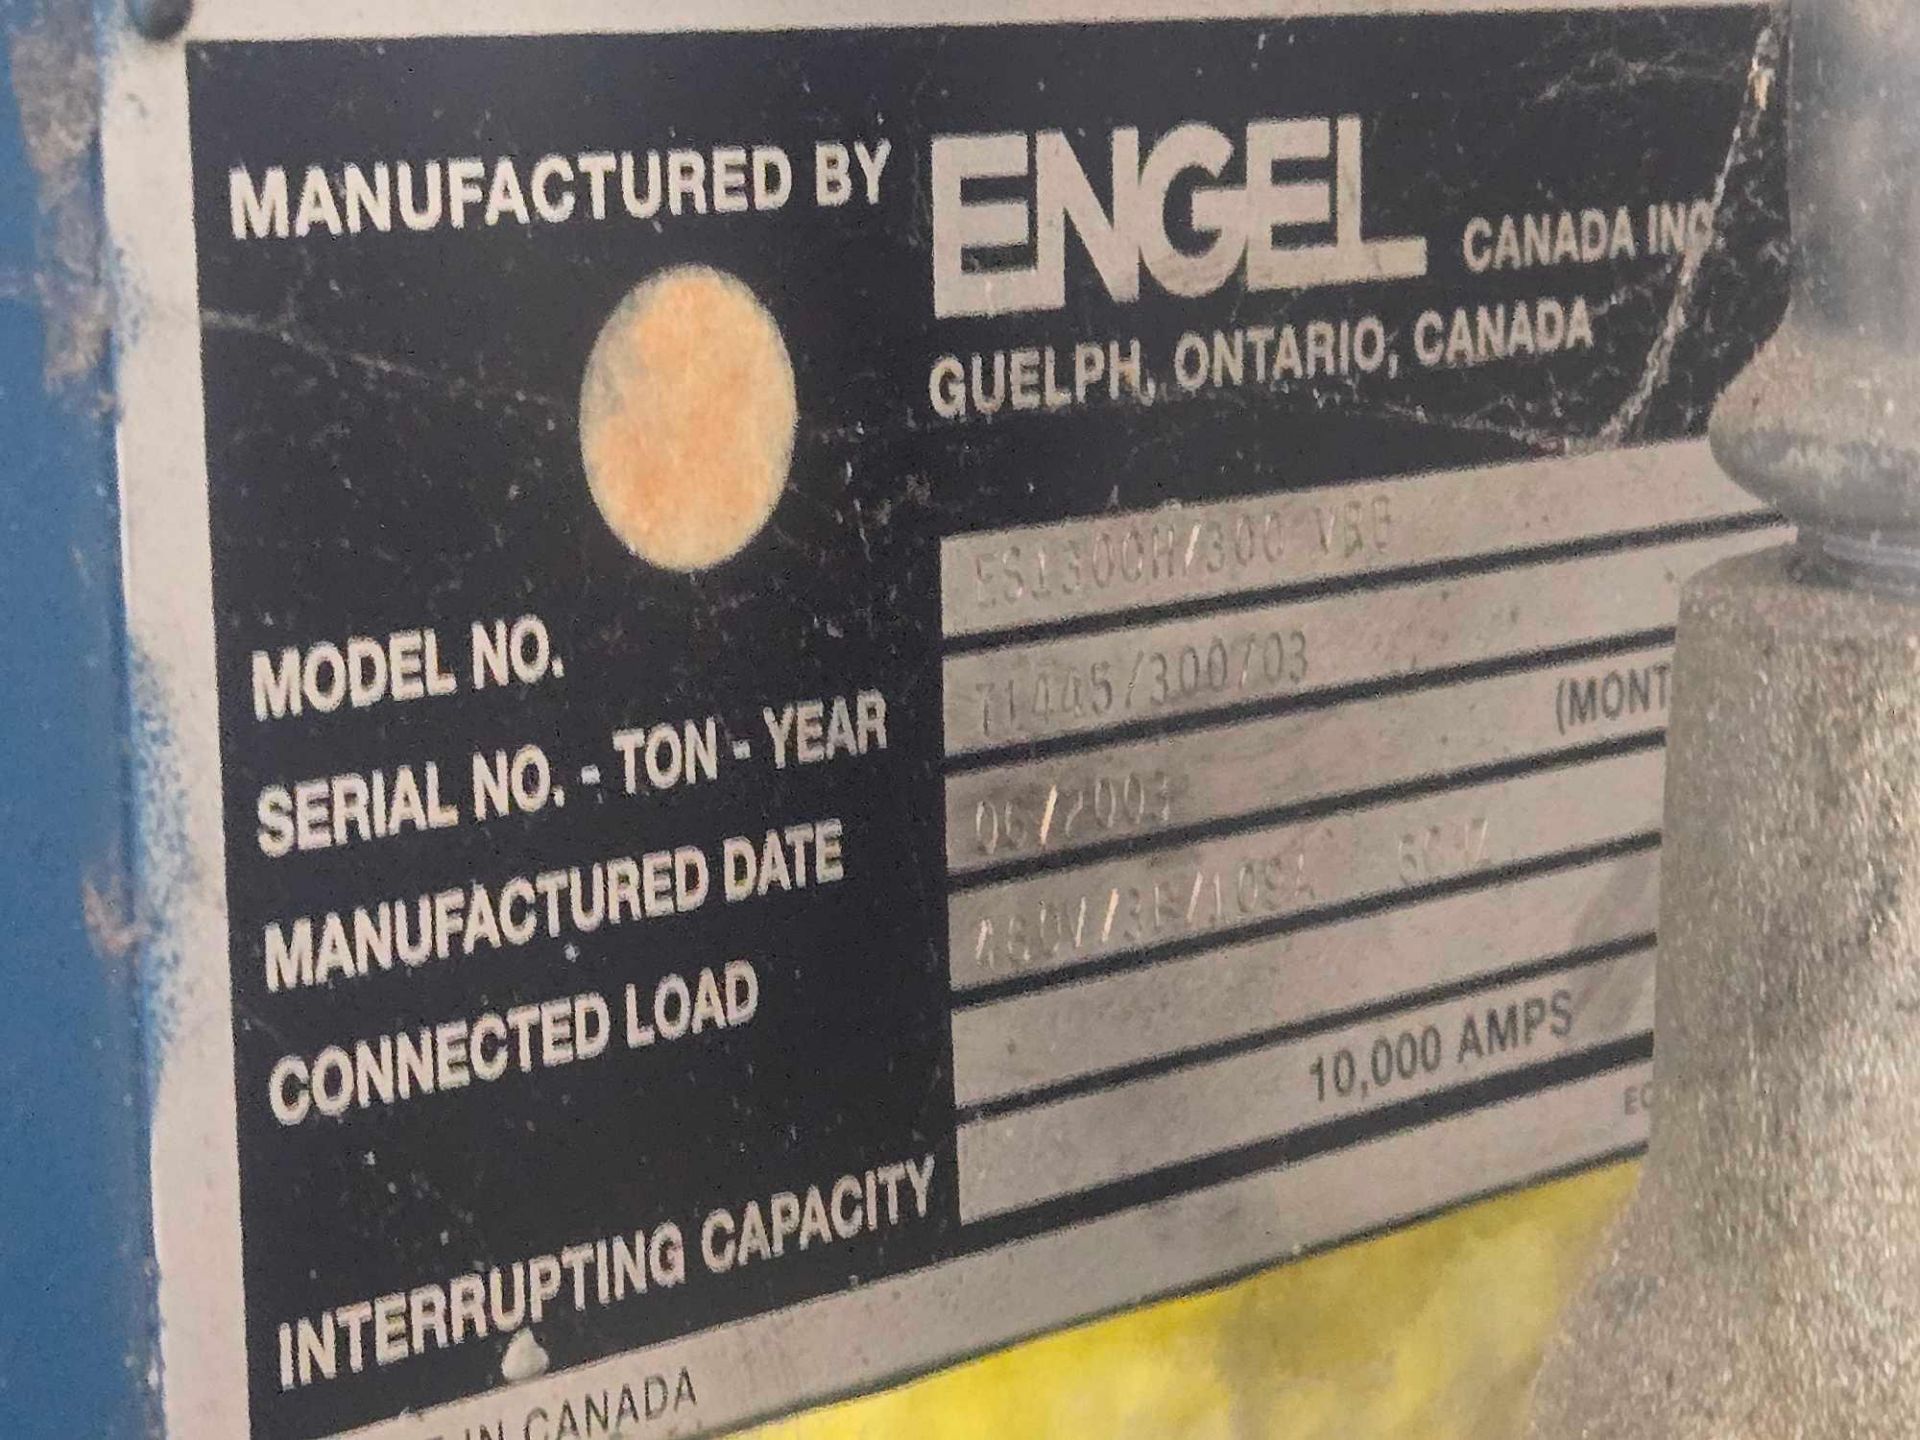 ENGEL-A02 300 ES085 TIE BAR-LESS VERTICAL INJECTION MOLDING MACHINE - Image 15 of 22